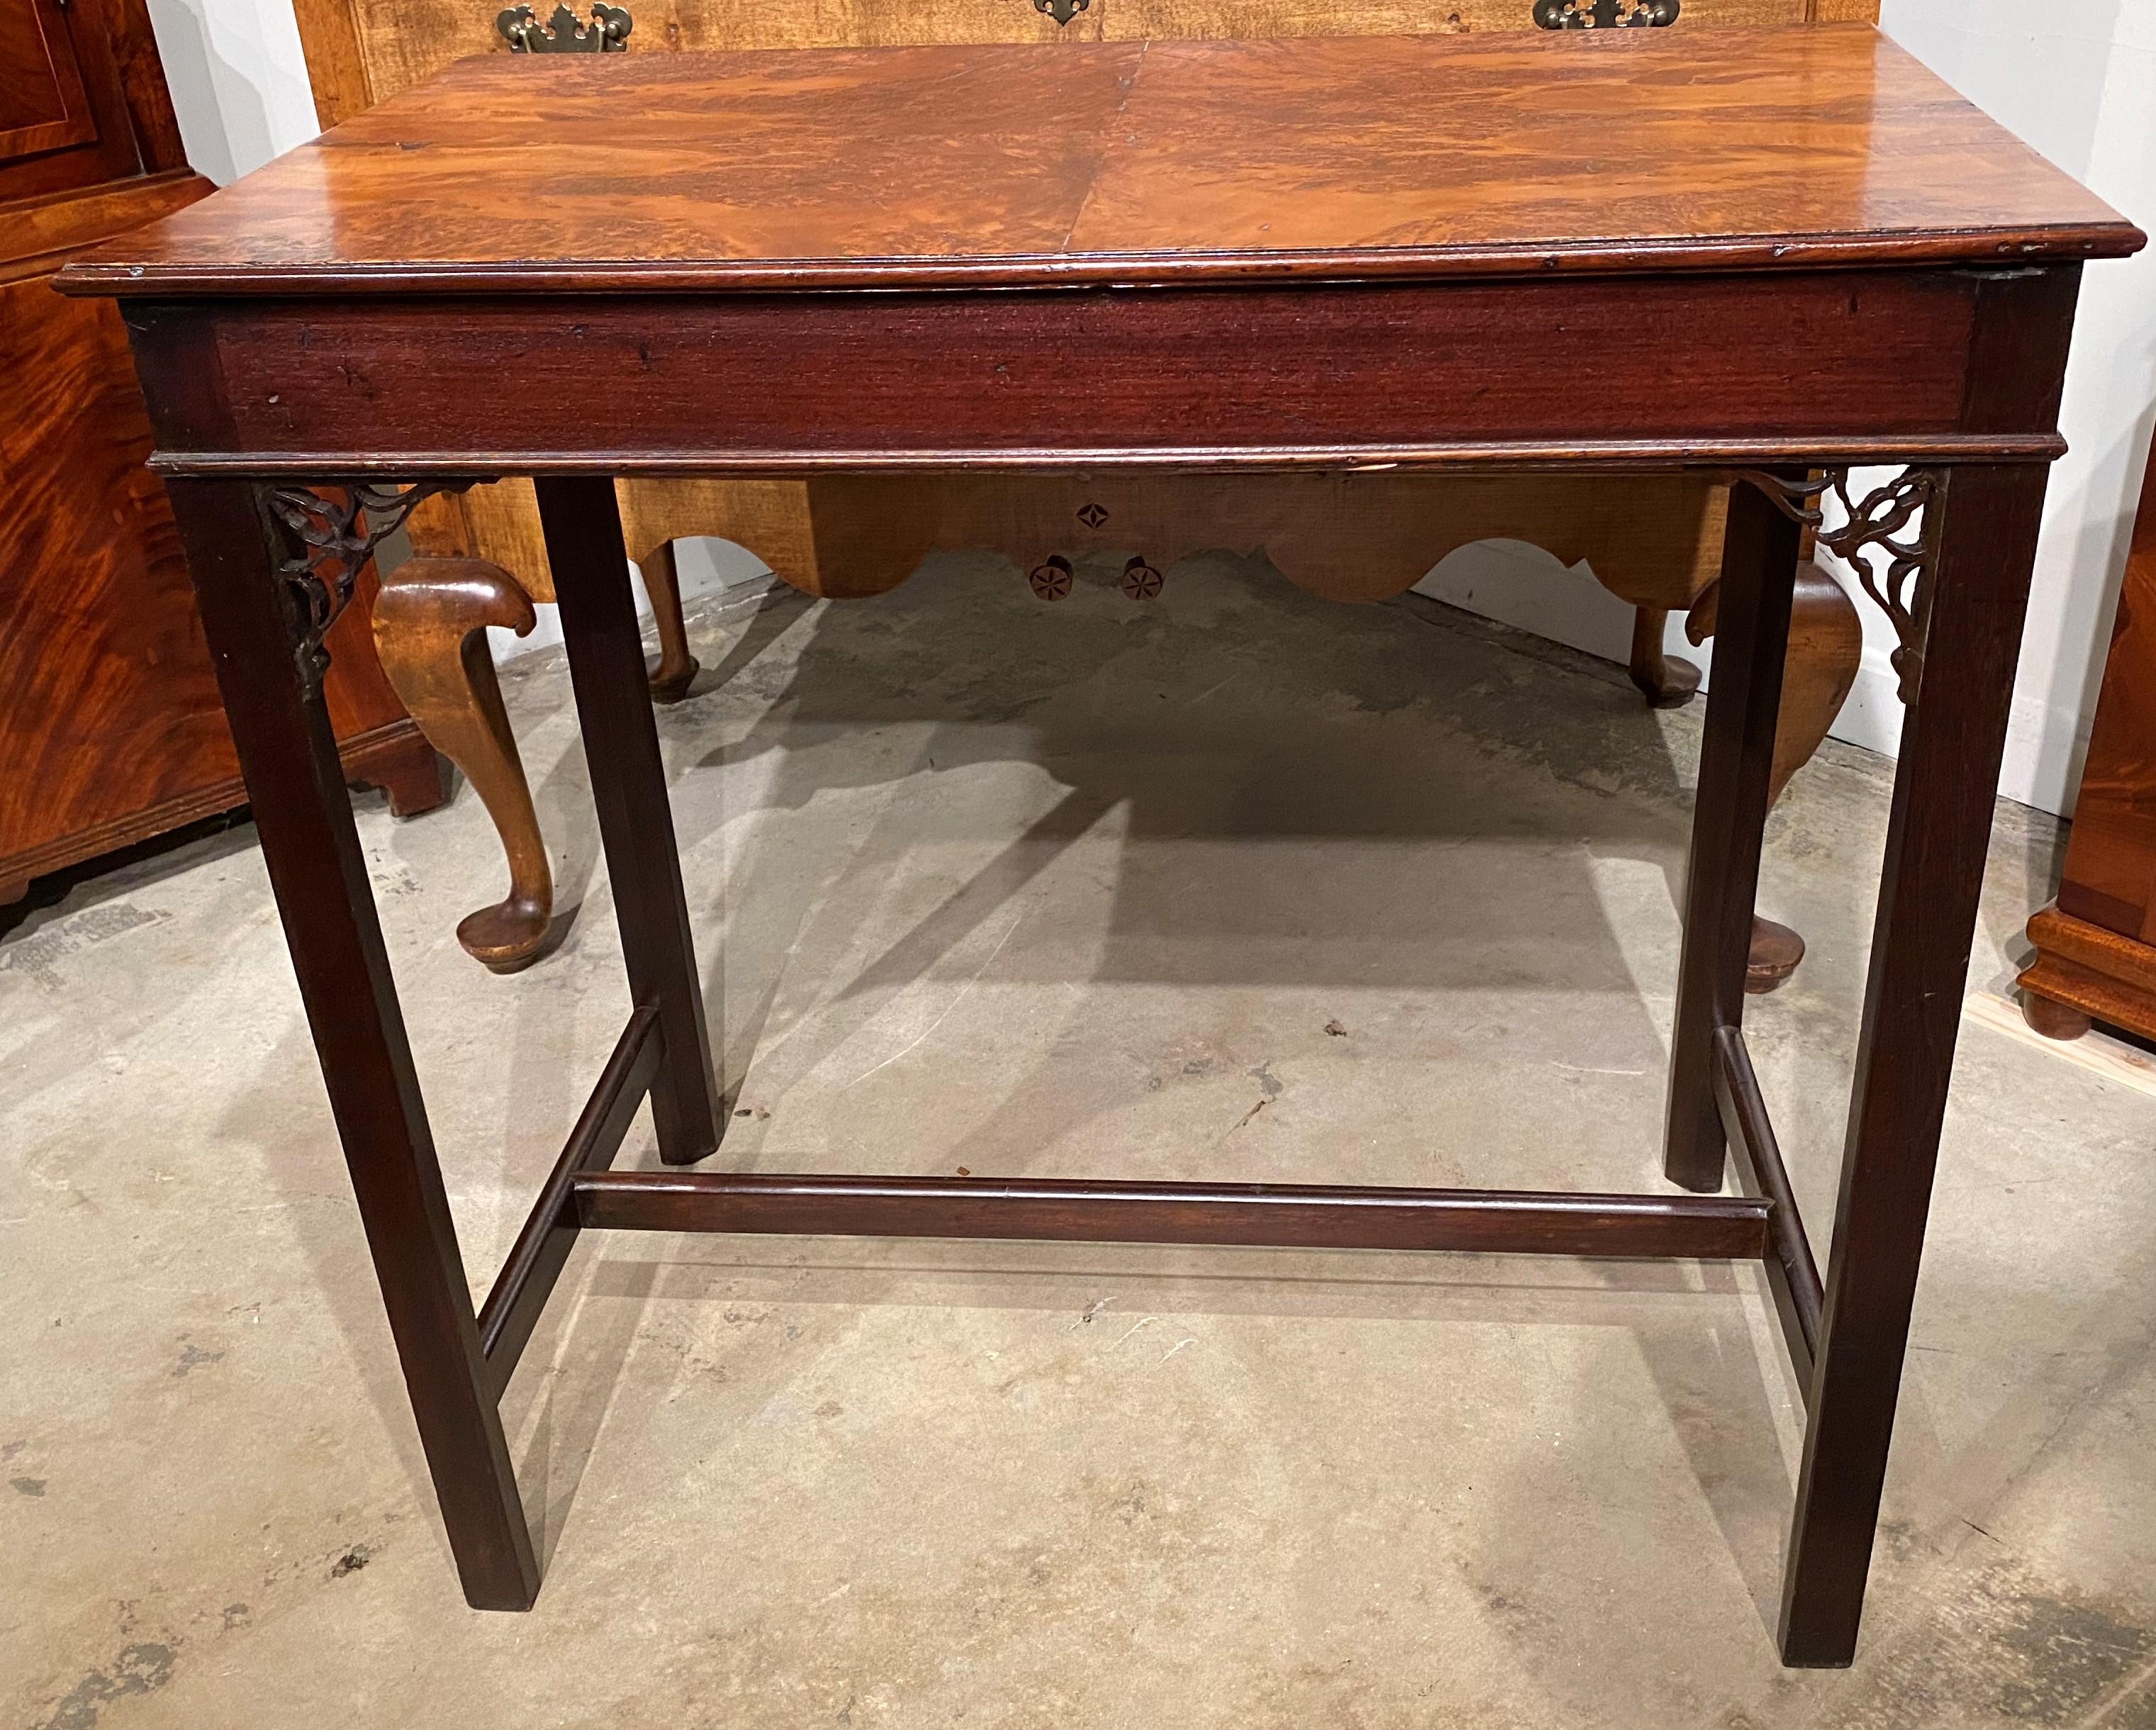 19th c English Mahogany Tea Table with Fretwork and Burled Yew Wood Top For Sale 3